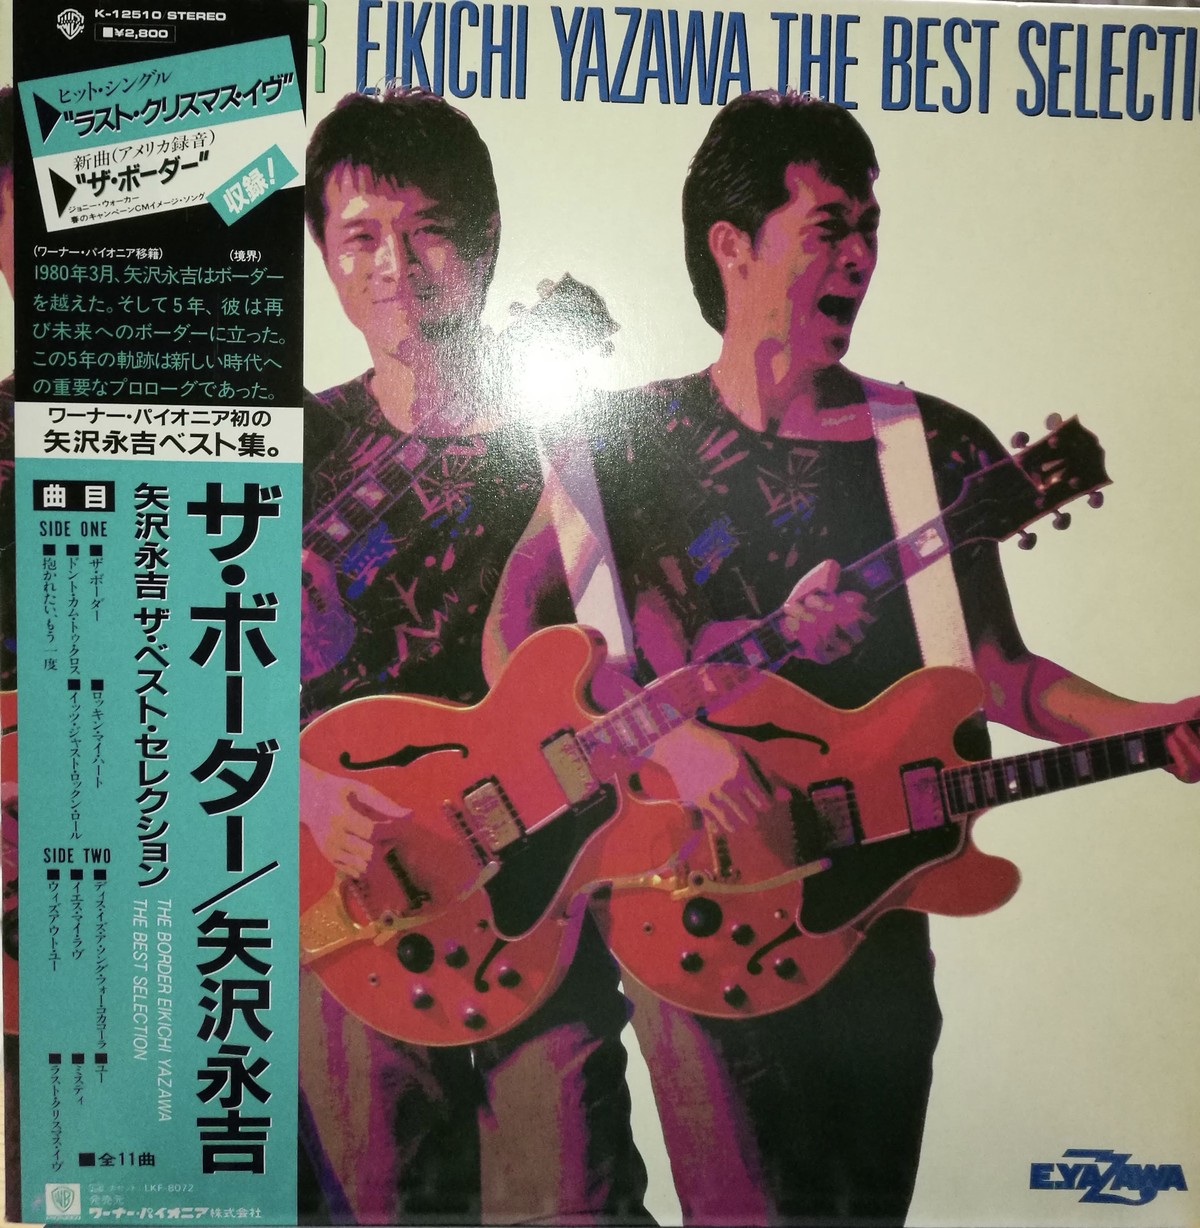 Lp 矢沢永吉 The Border Eikichi Yazawa The Best Selection Compact Disco Asia